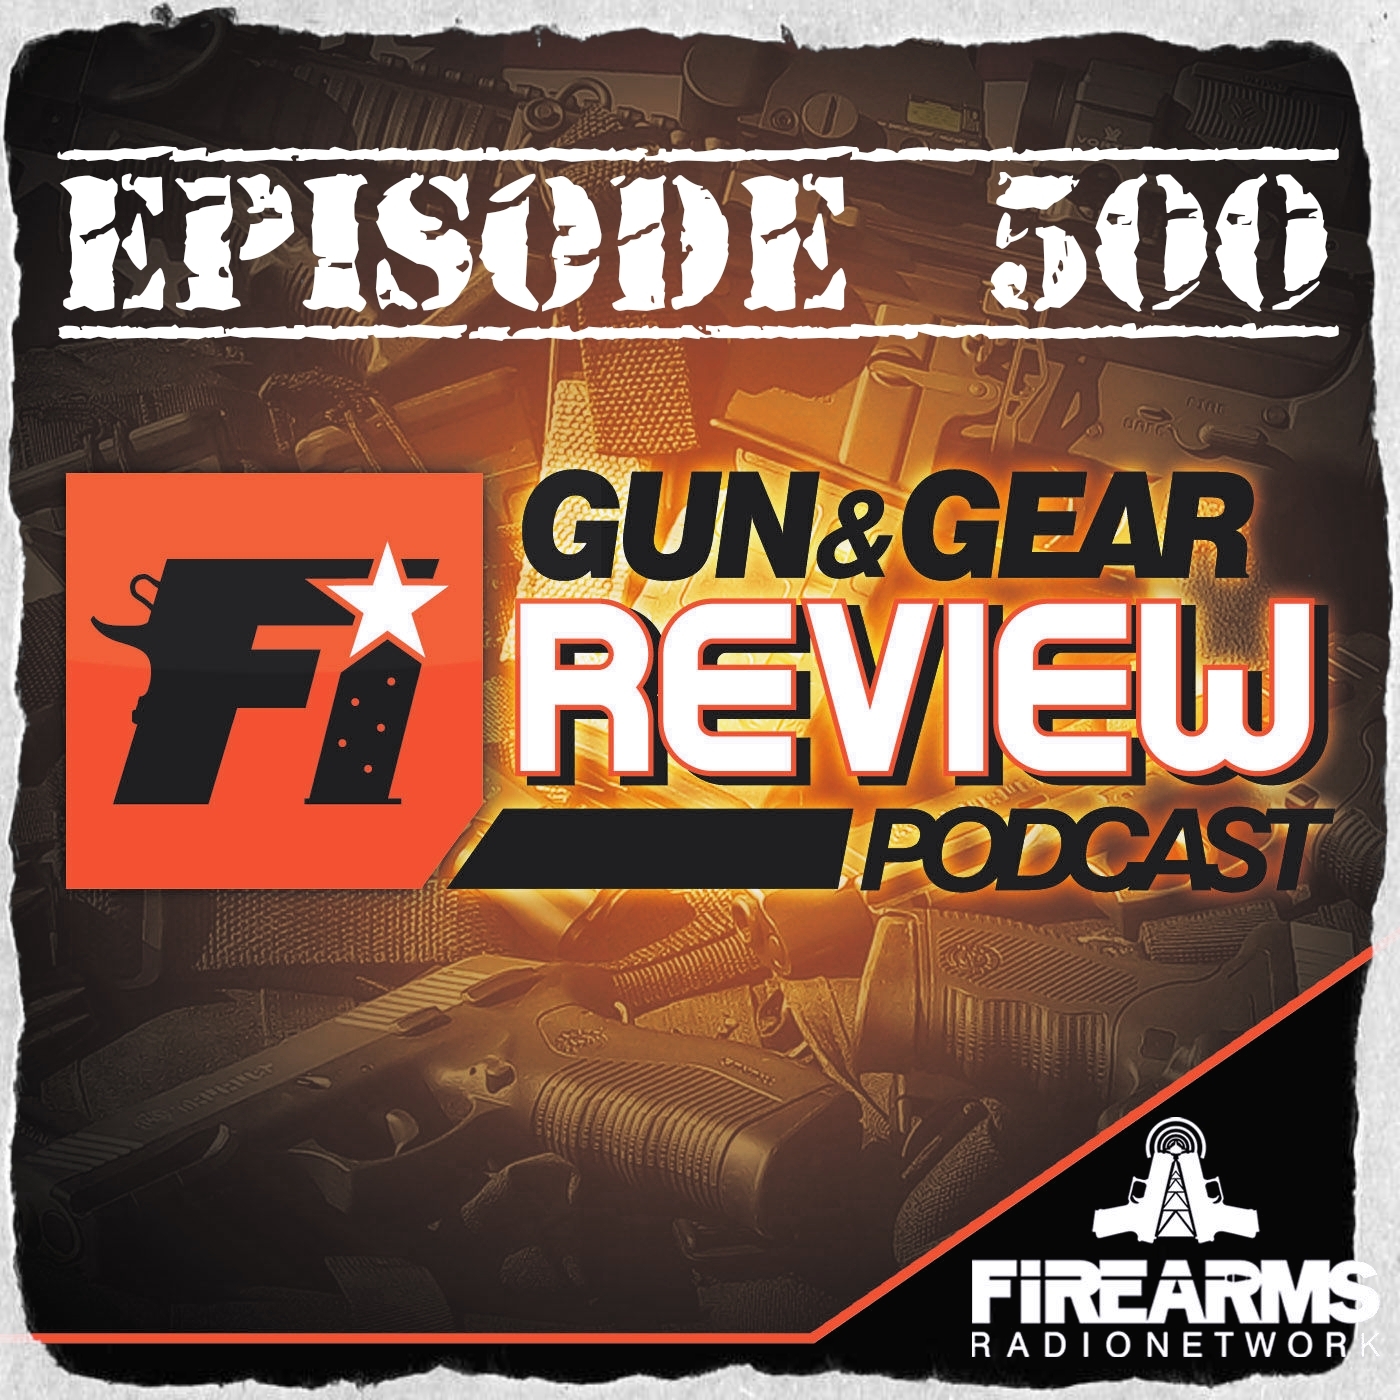 Gun & Gear Review Podcast episode 500 – 10 years